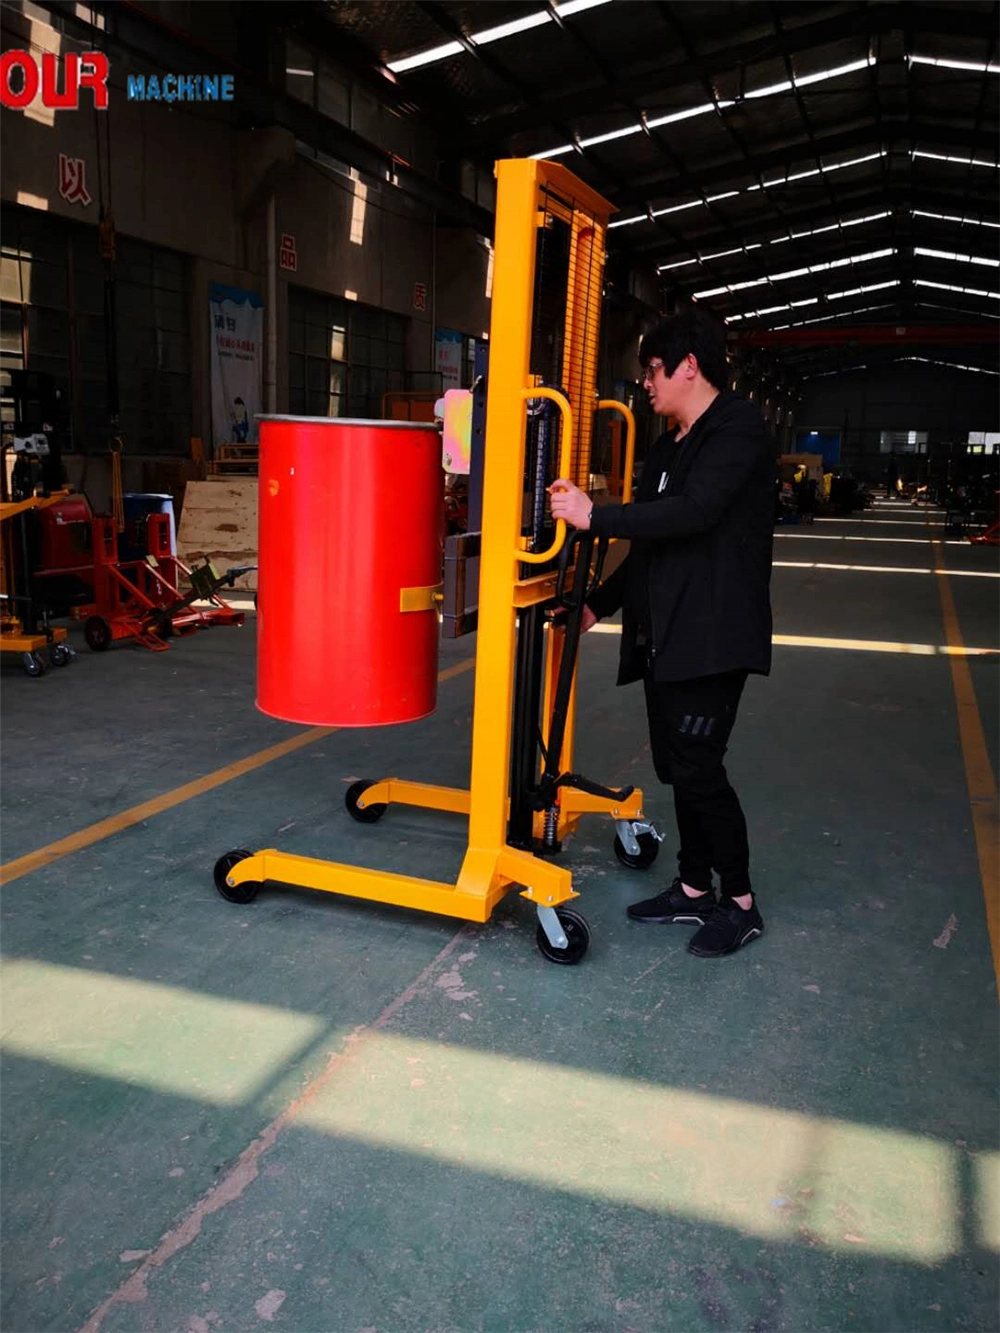 China Factory Price Manual 400kg Drum Lifter Hydraulic Drum Stacker